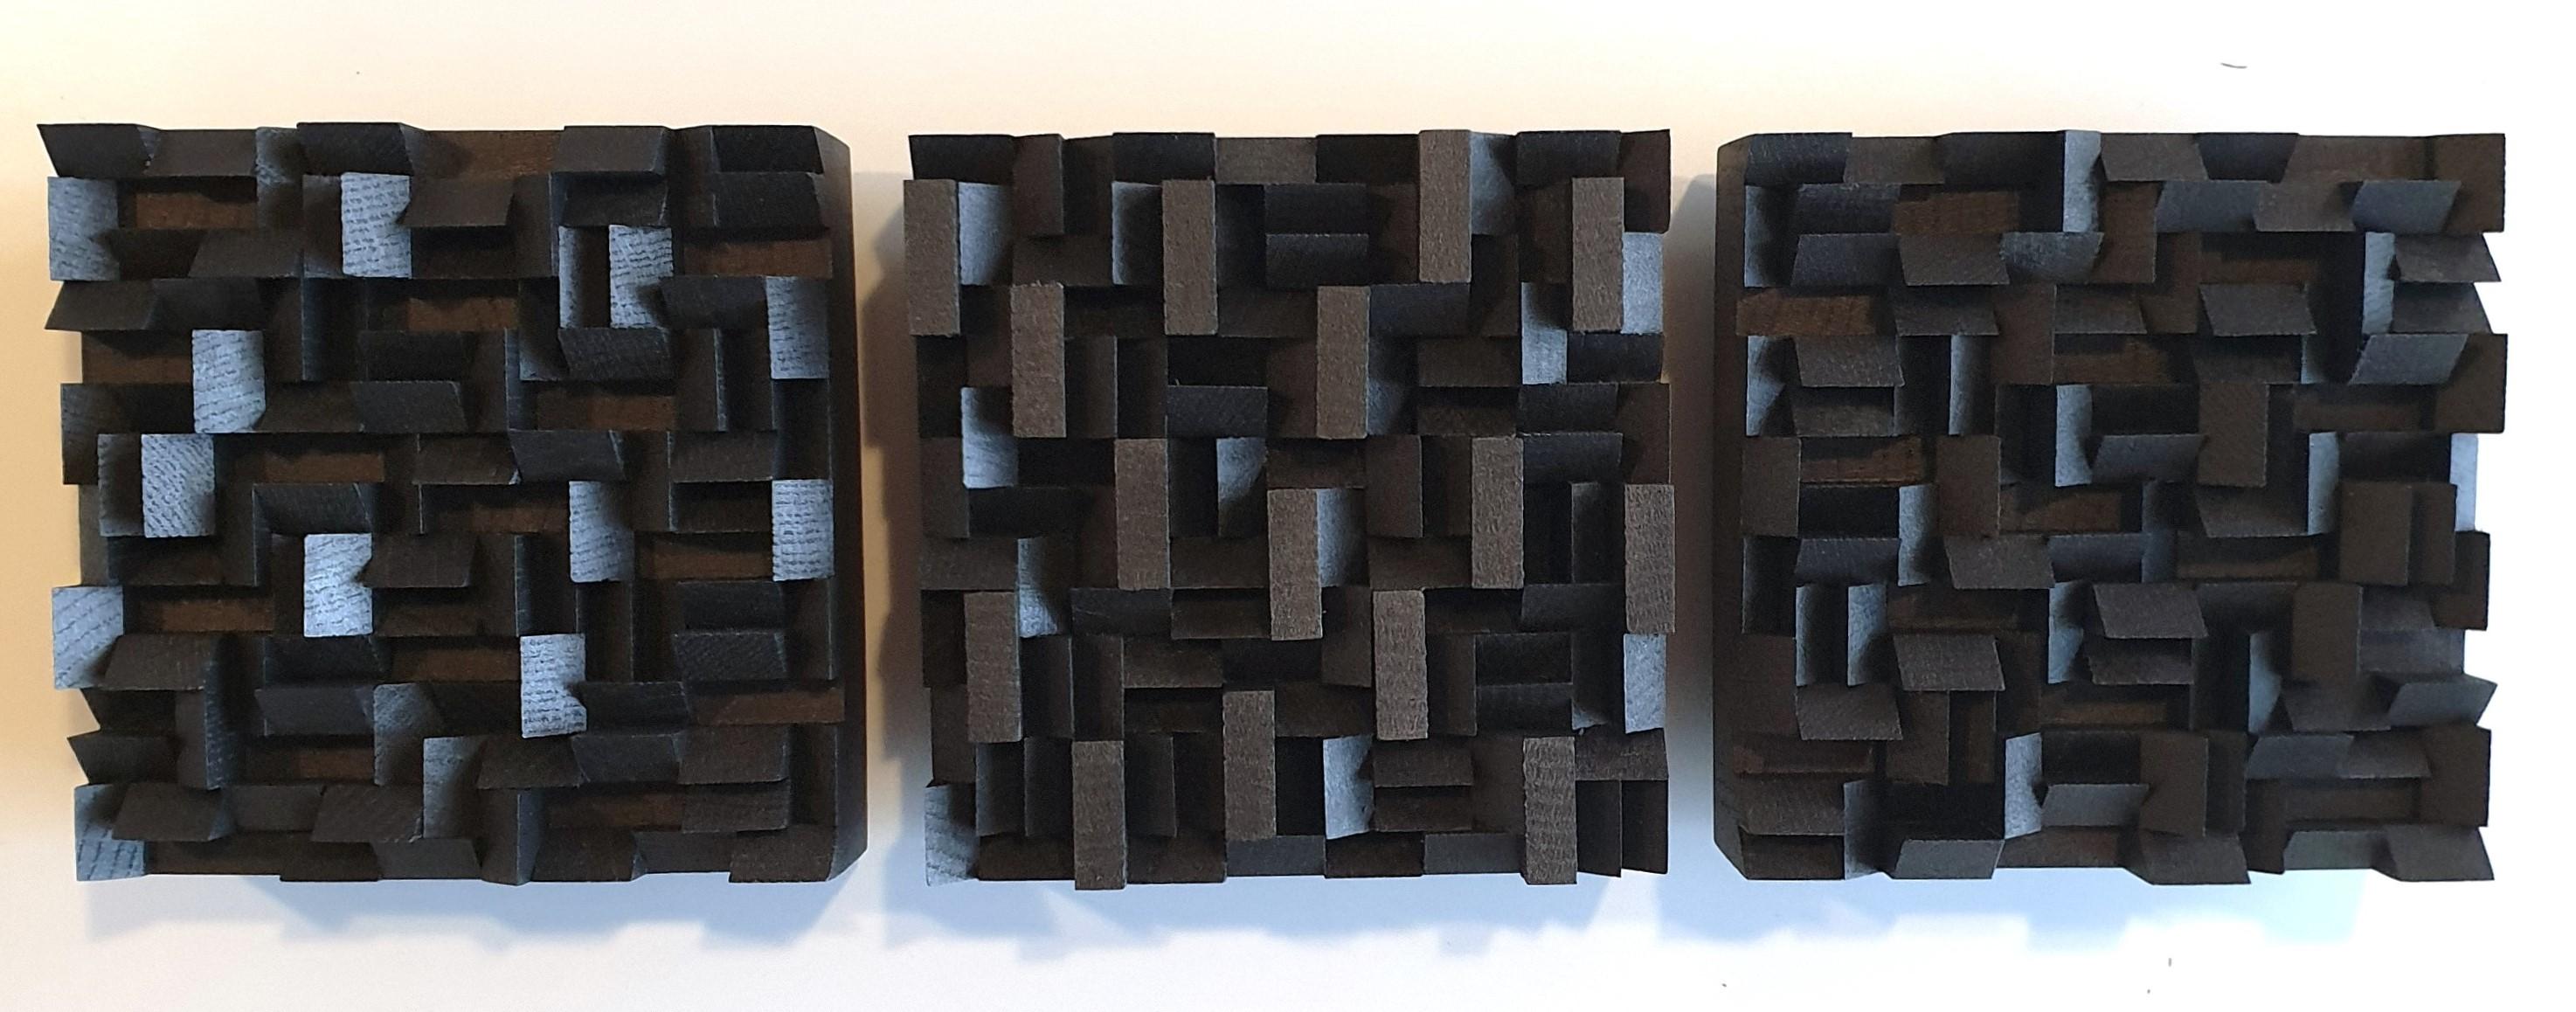 Olivier Julia Abstract Sculpture - Variation triptyque I ed. 1/3 -  set of 3 contemporary modern wall sculptures